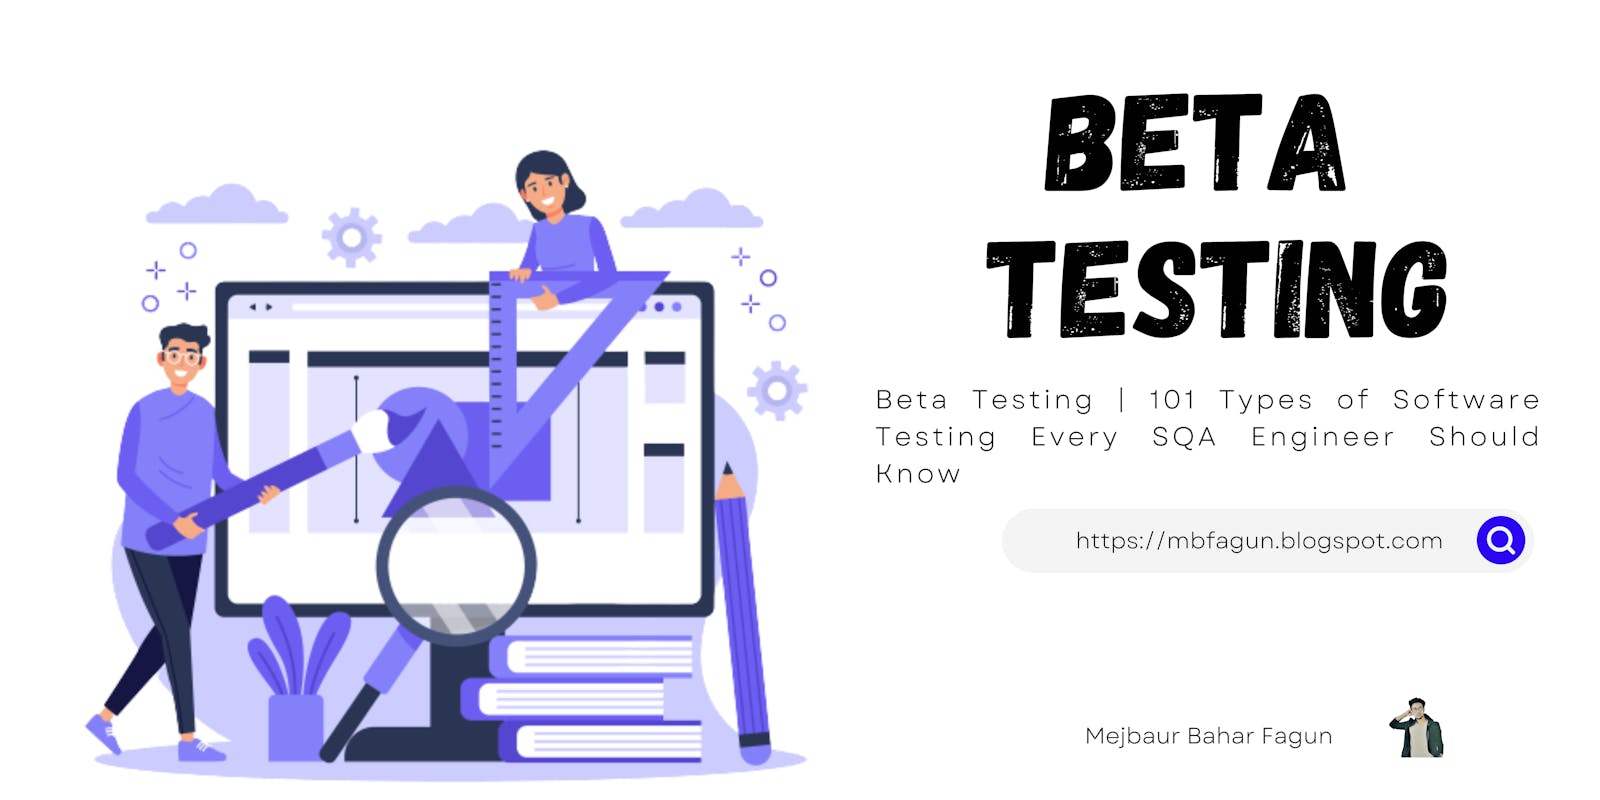 Beta Testing | 101 Types of Software Testing Every SQA Engineer Should Know 🧪🕵️‍♂️